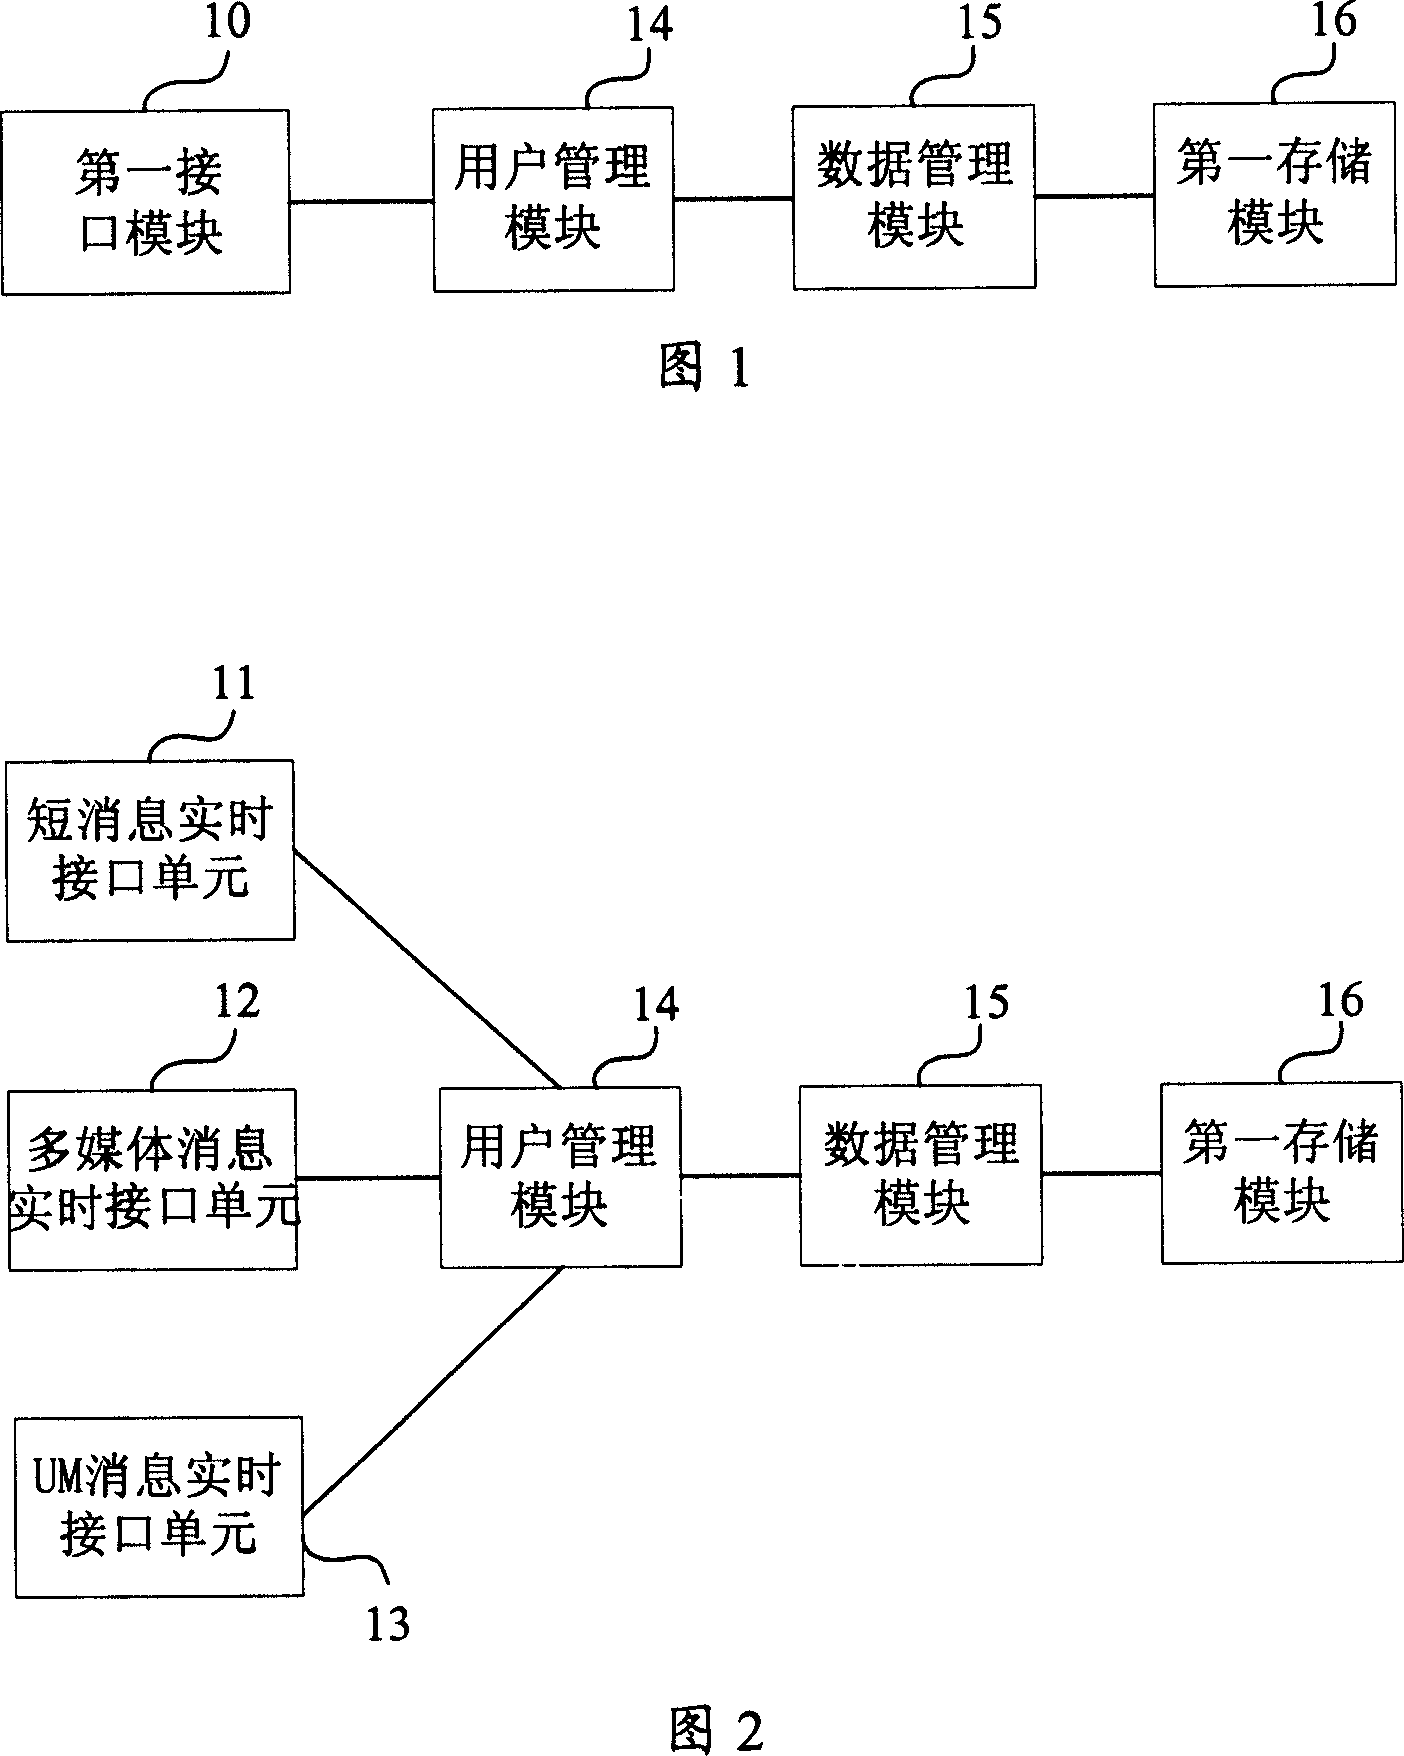 Message processing device, system and method